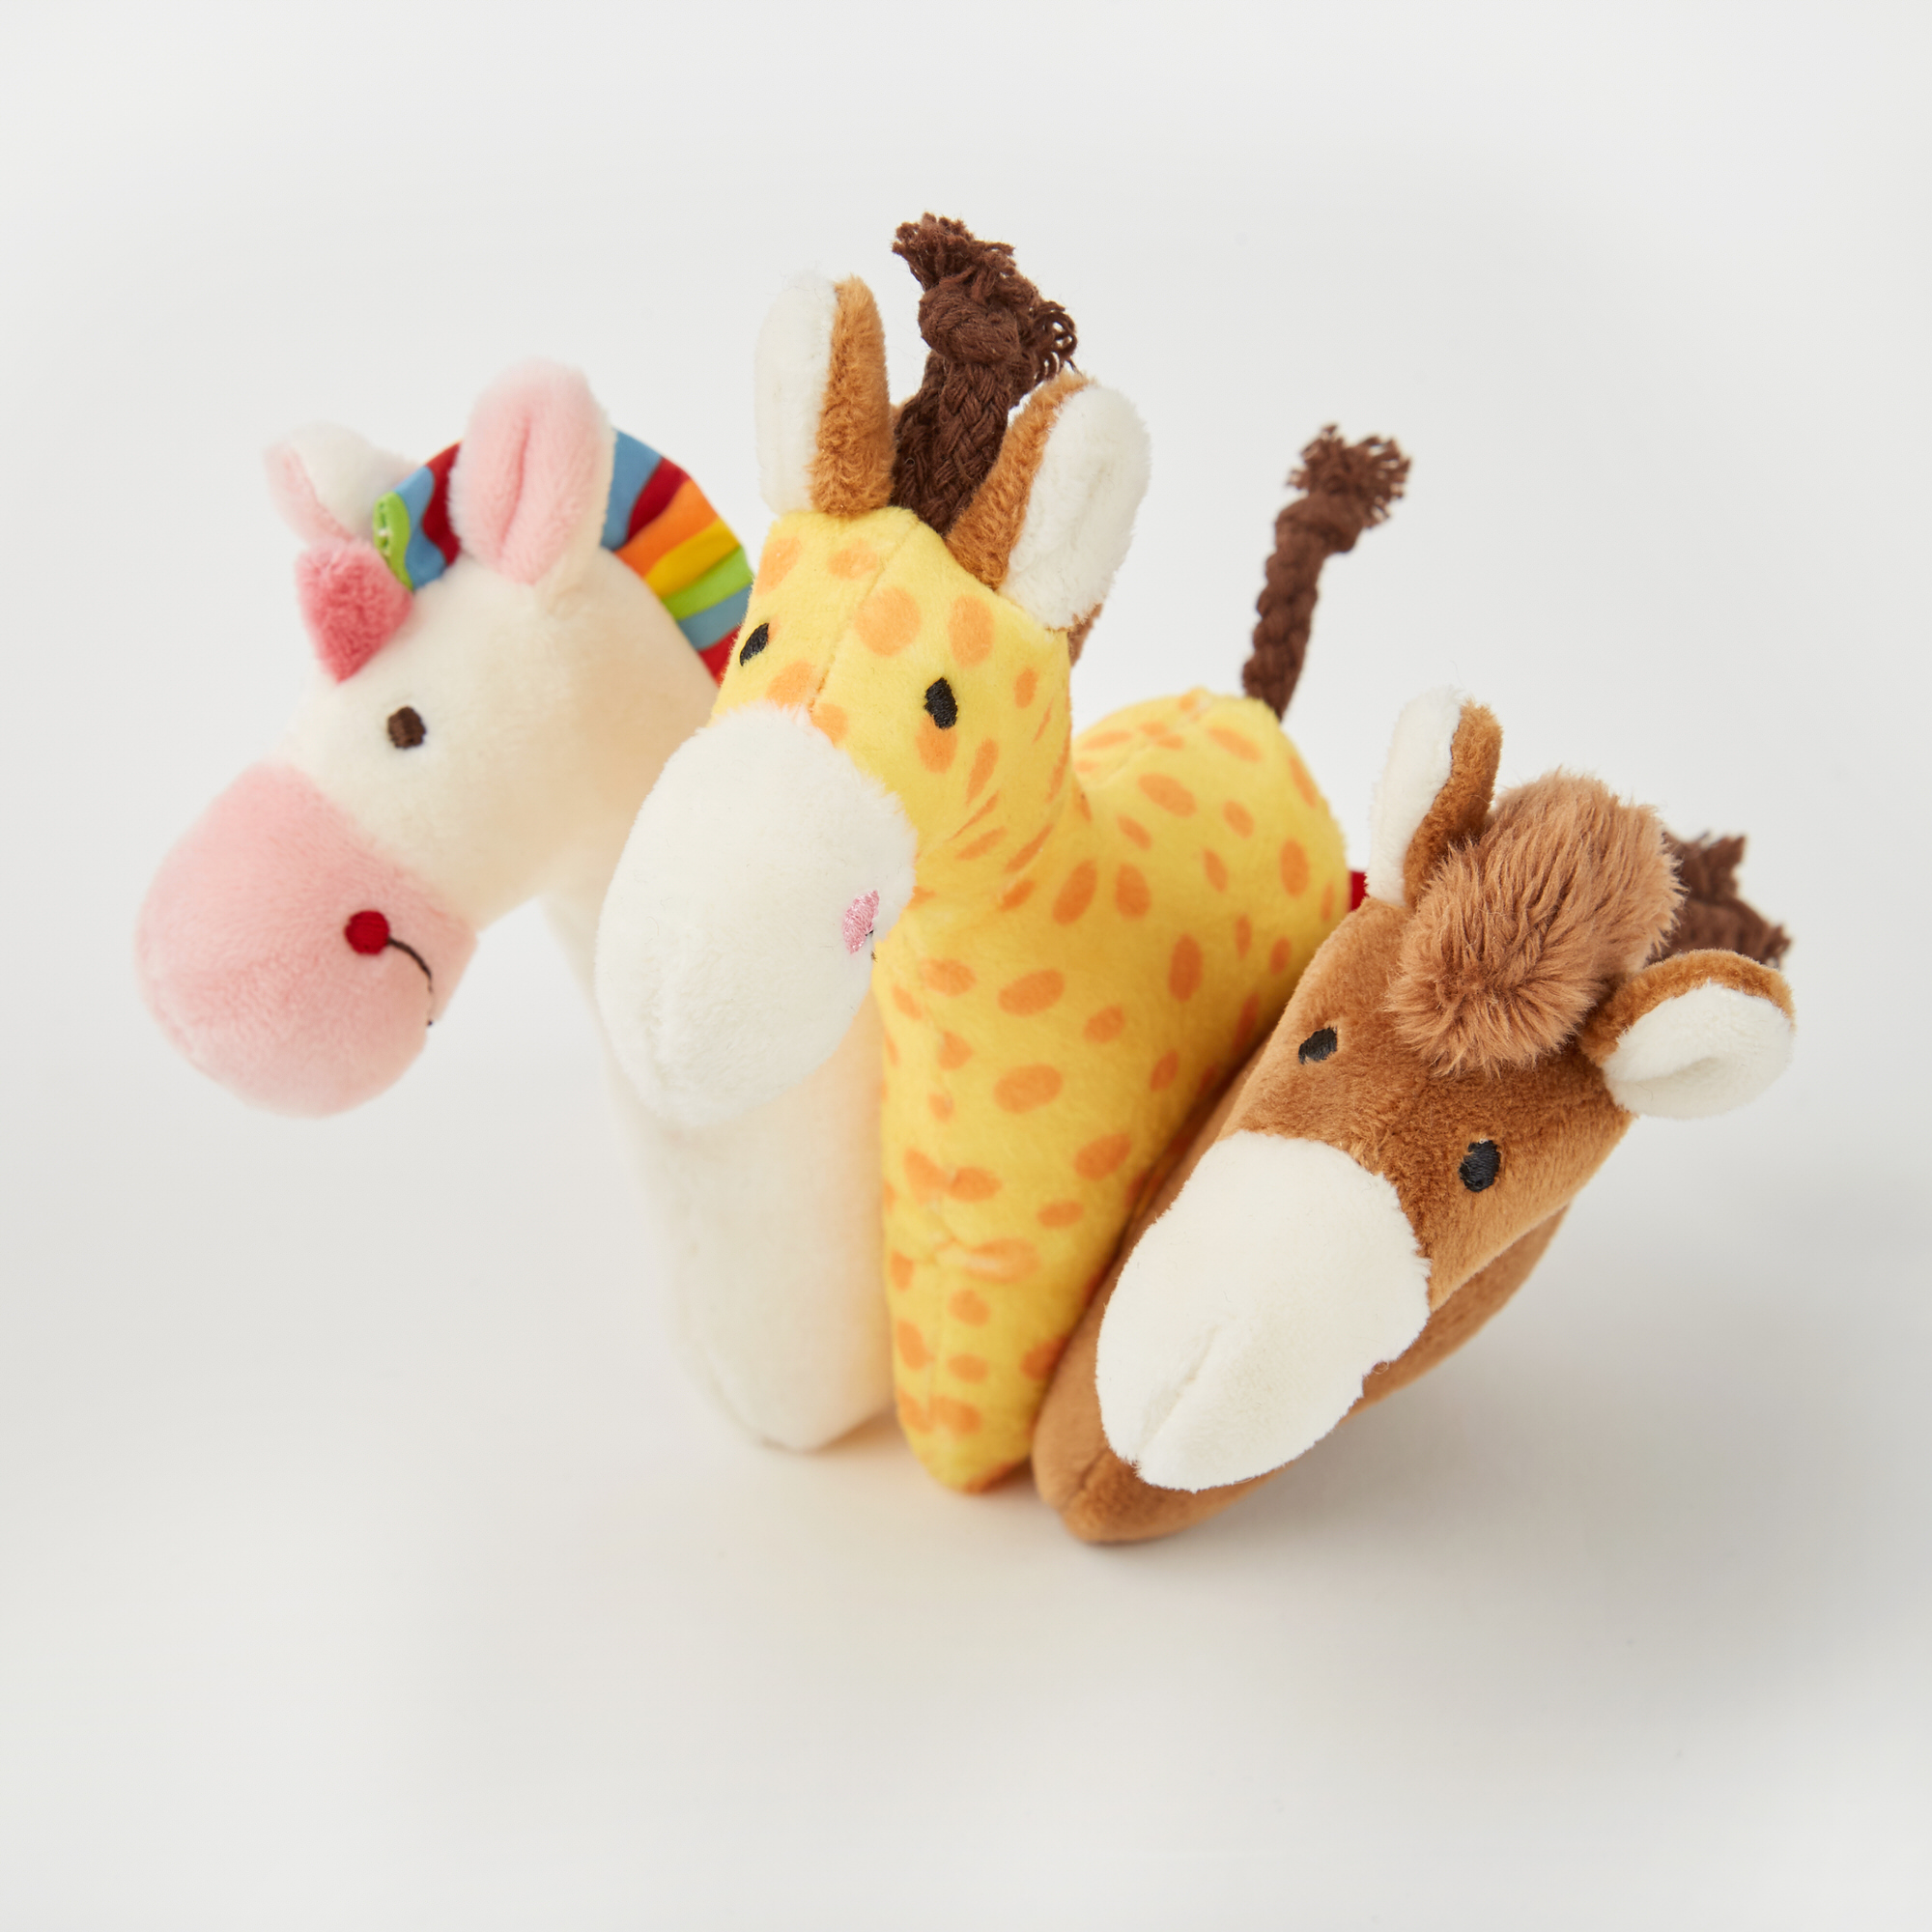 Soft brown pony rattle